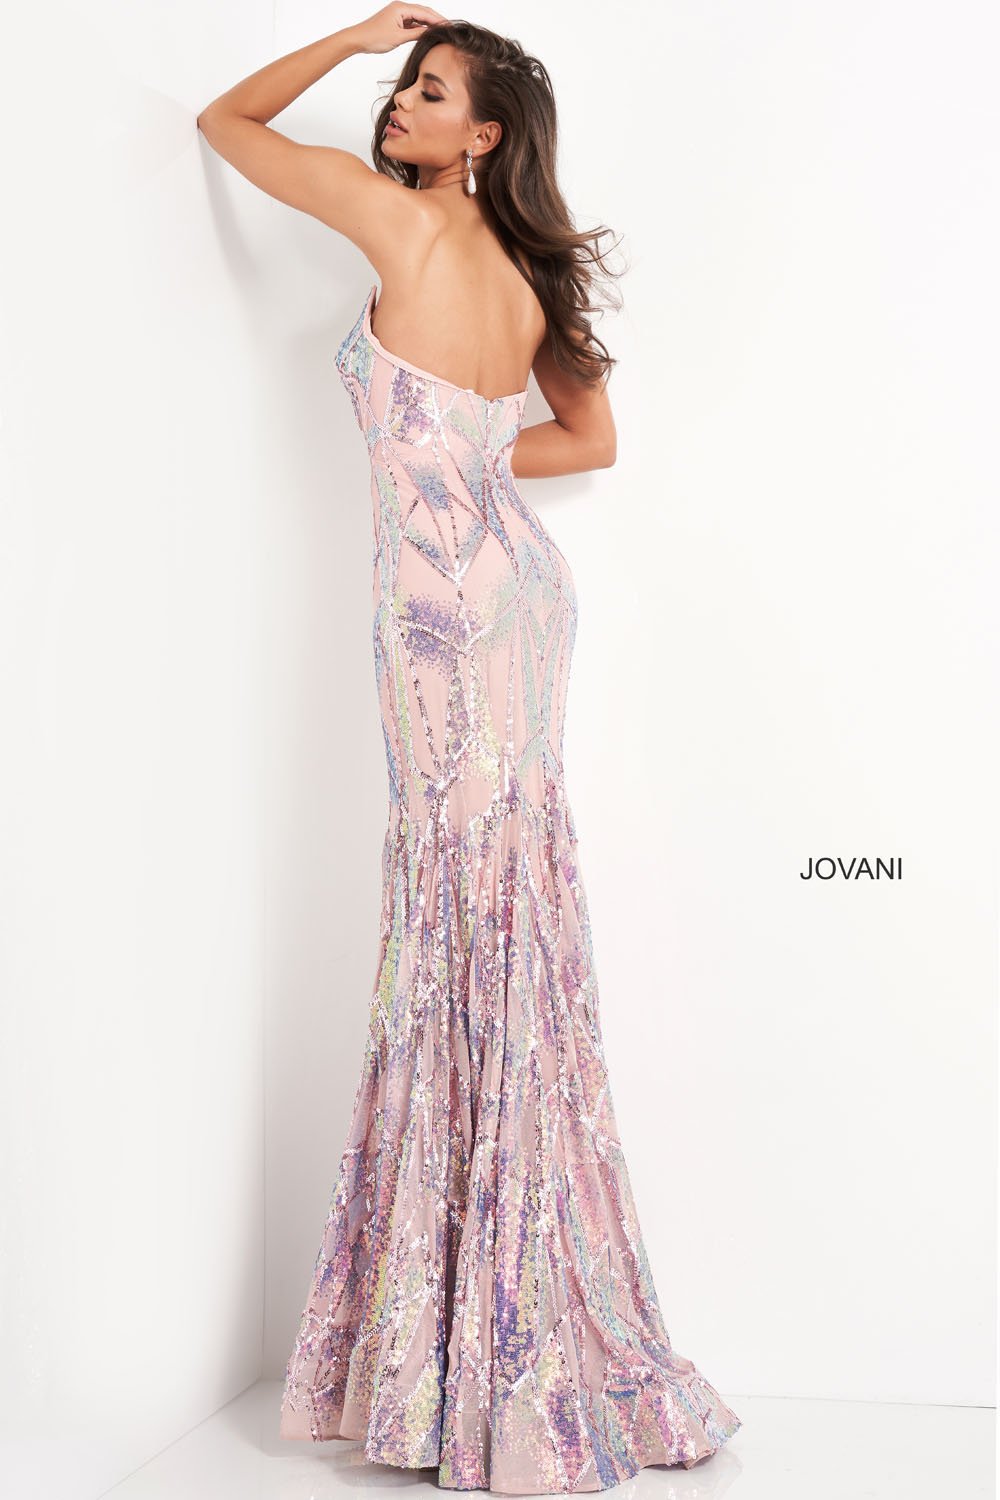 Jovani 05100 dress images in these colors: Black Multi, Light Blue, Navy, Pink.